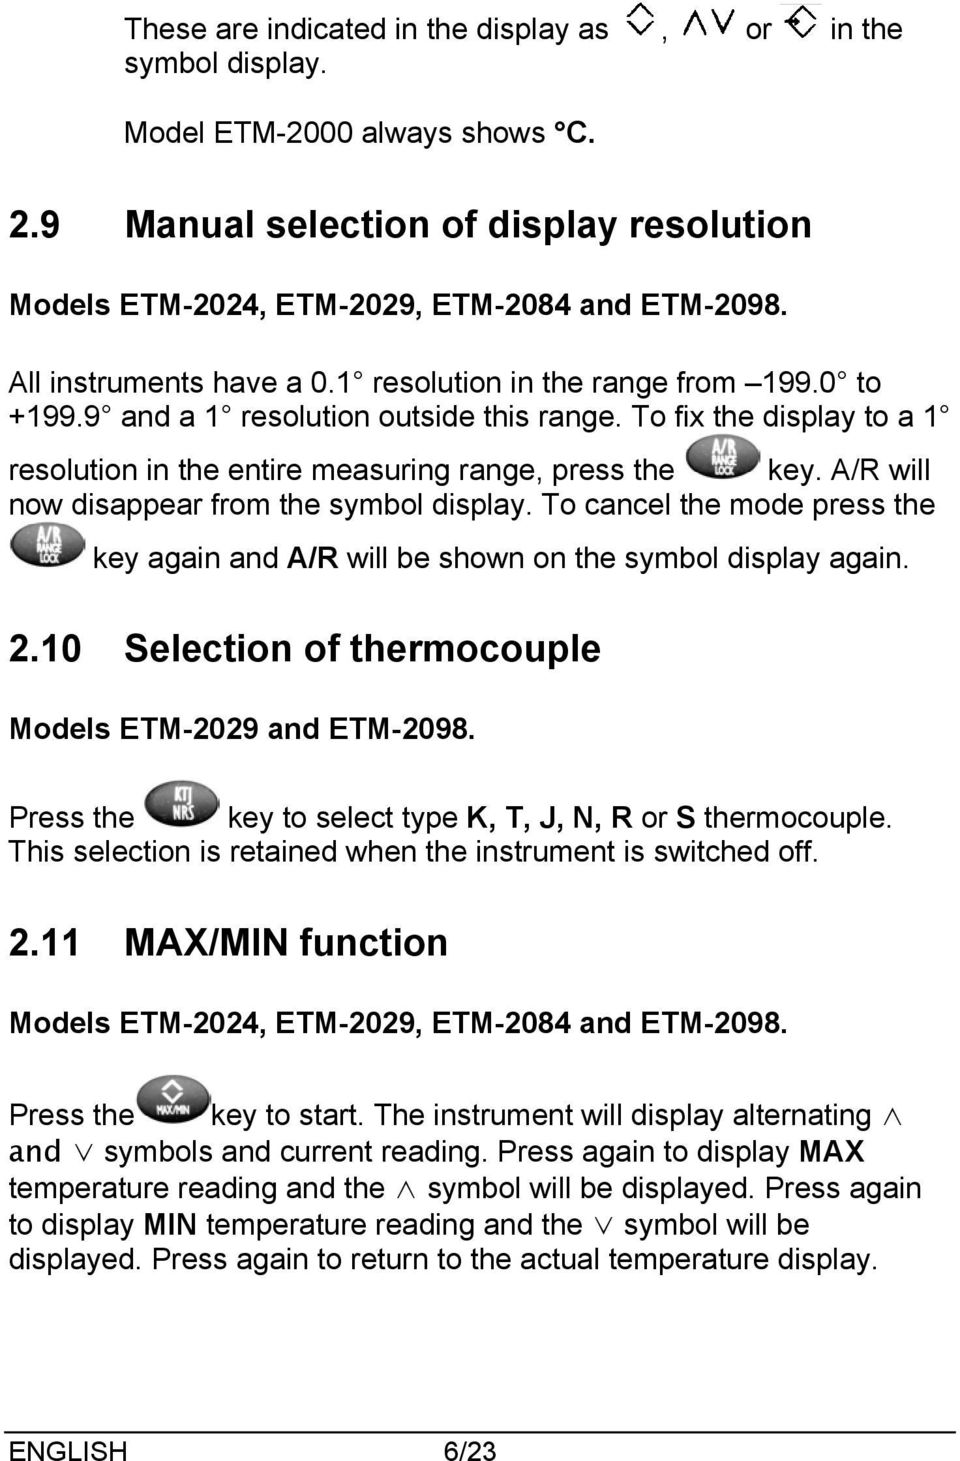 A/R will now disappear from the symbol display. To cancel the mode press the key again and A/R will be shown on the symbol display again. 2.10 Selection of thermocouple Models ETM-2029 and ETM-2098.